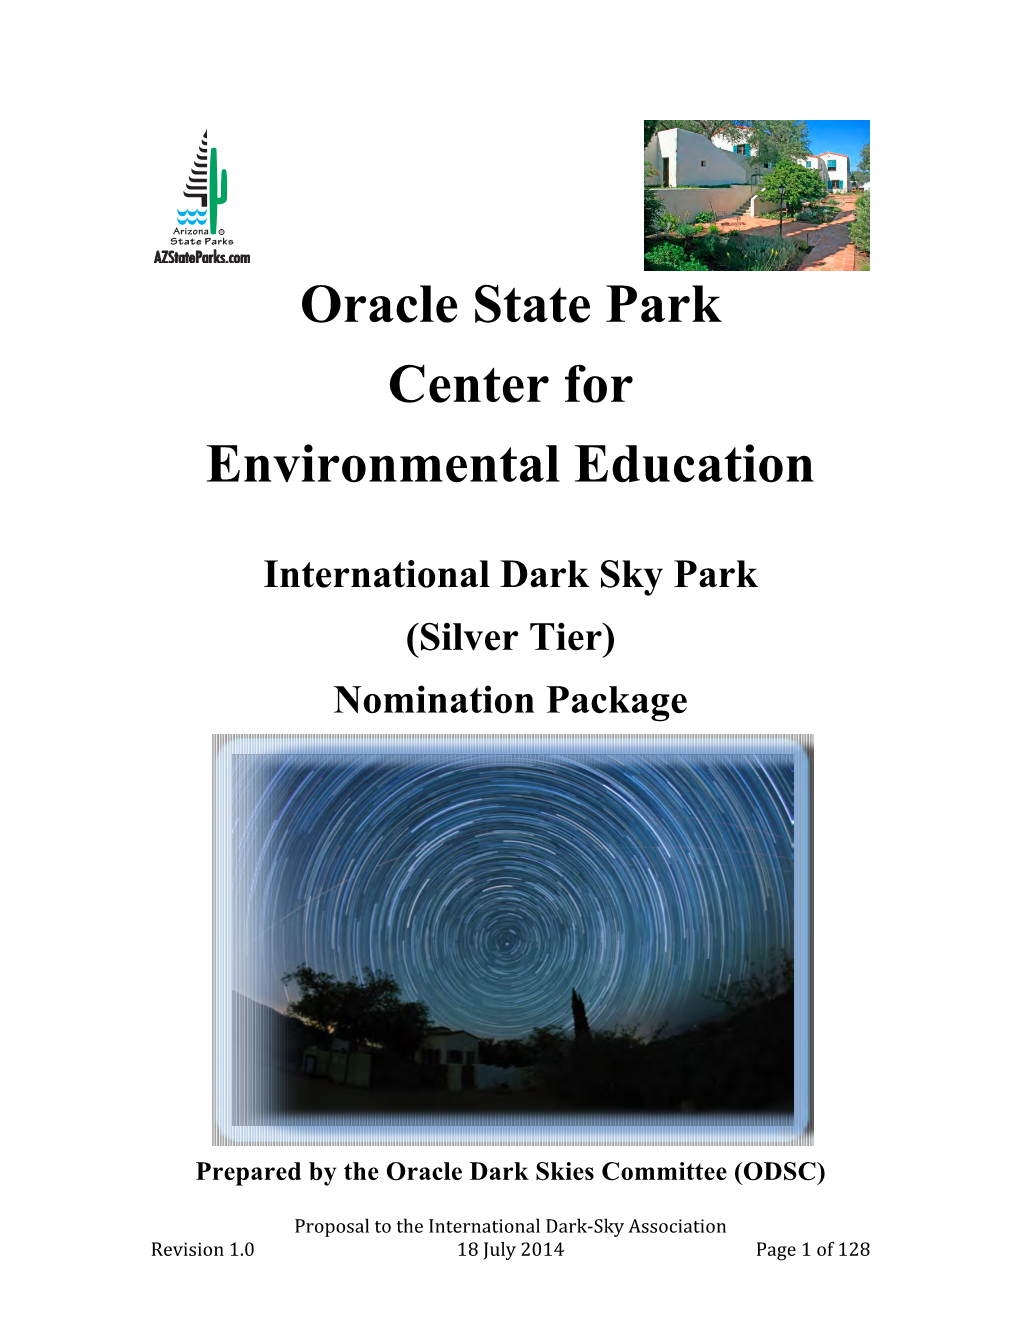 Oracle State Park Center for Environmental Education